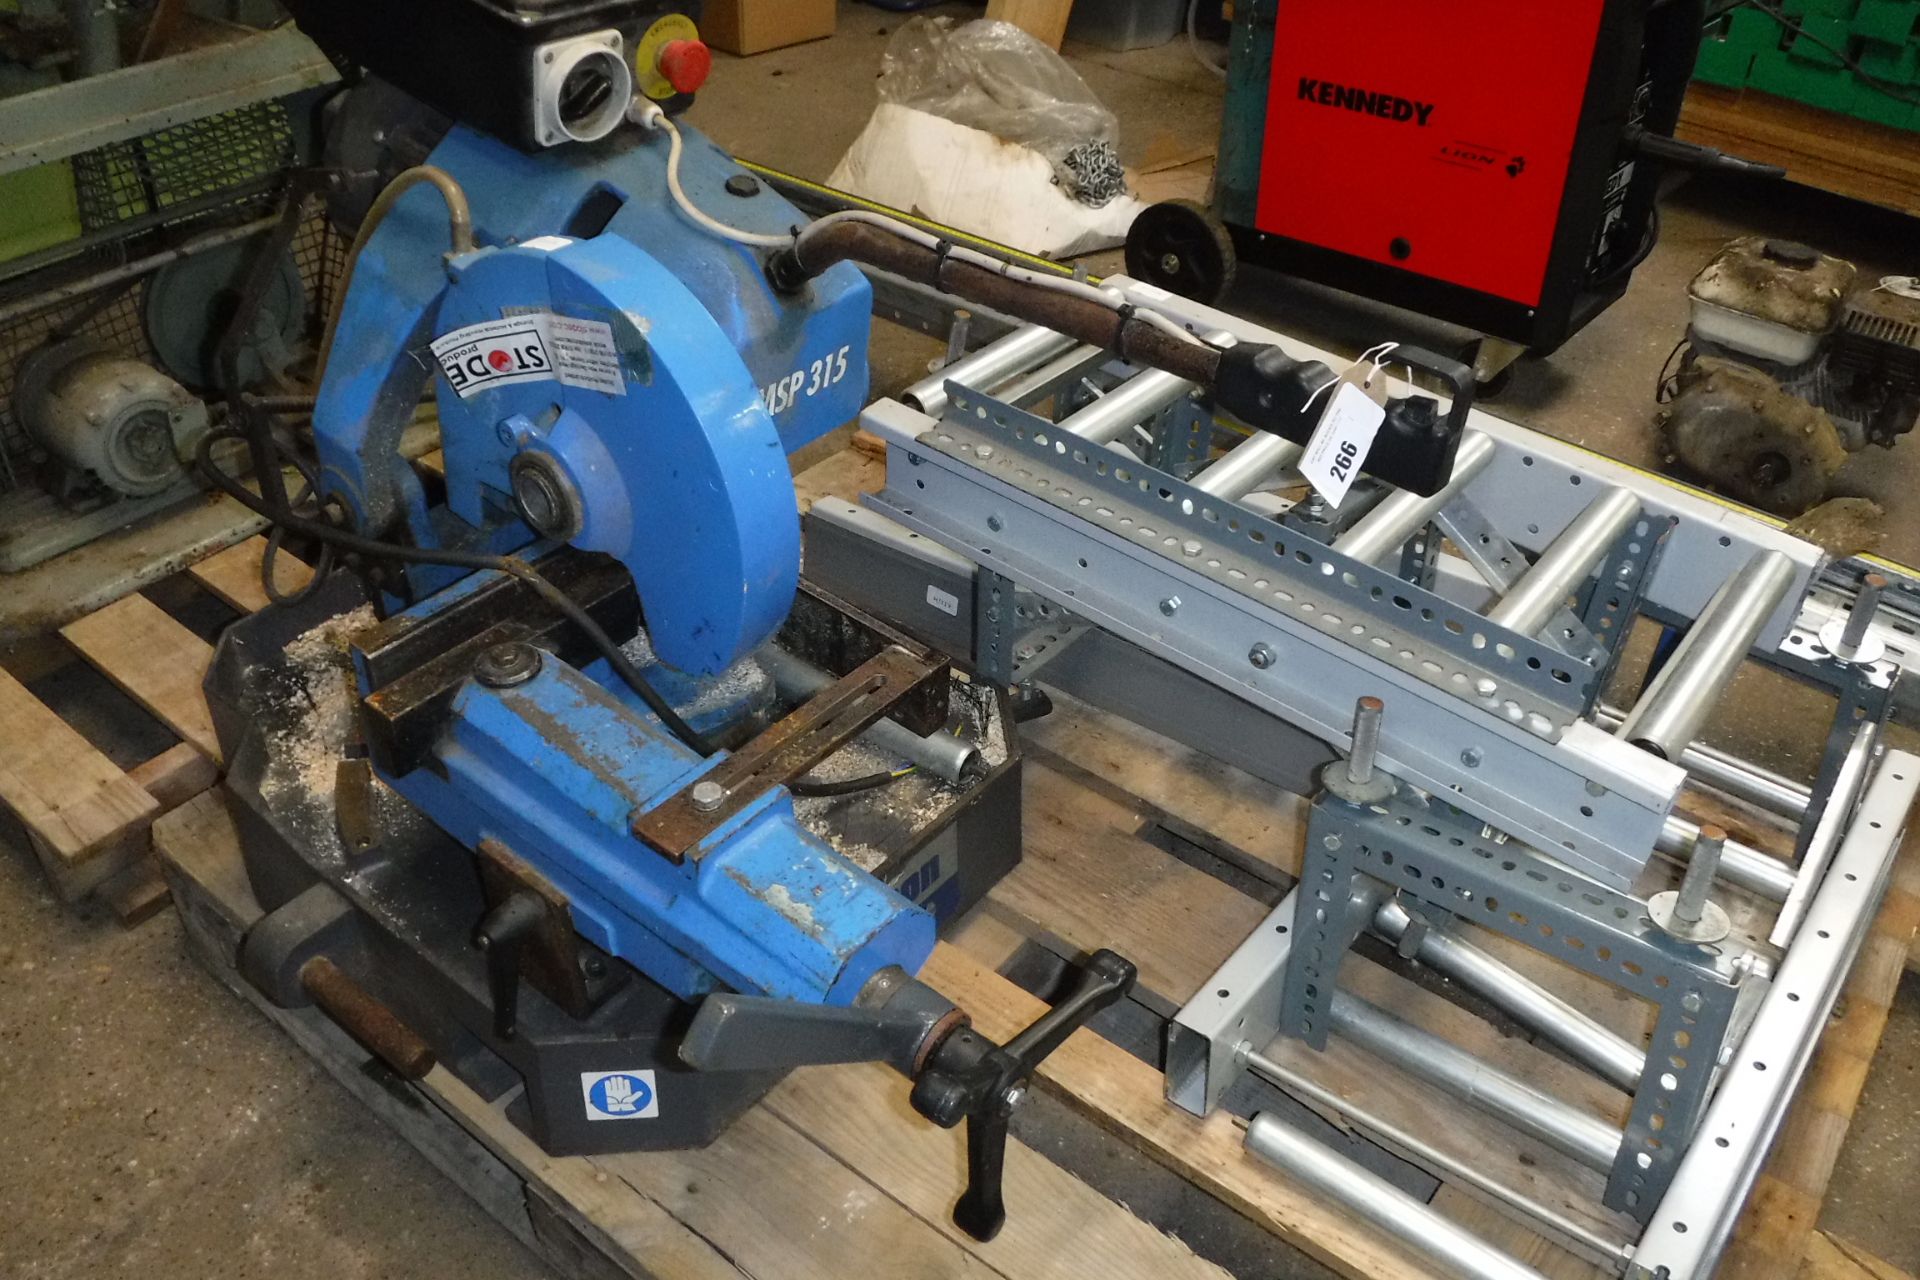 Addison MSP315 metal chopsaw with large clamp, 3 phase with associated converyor feed